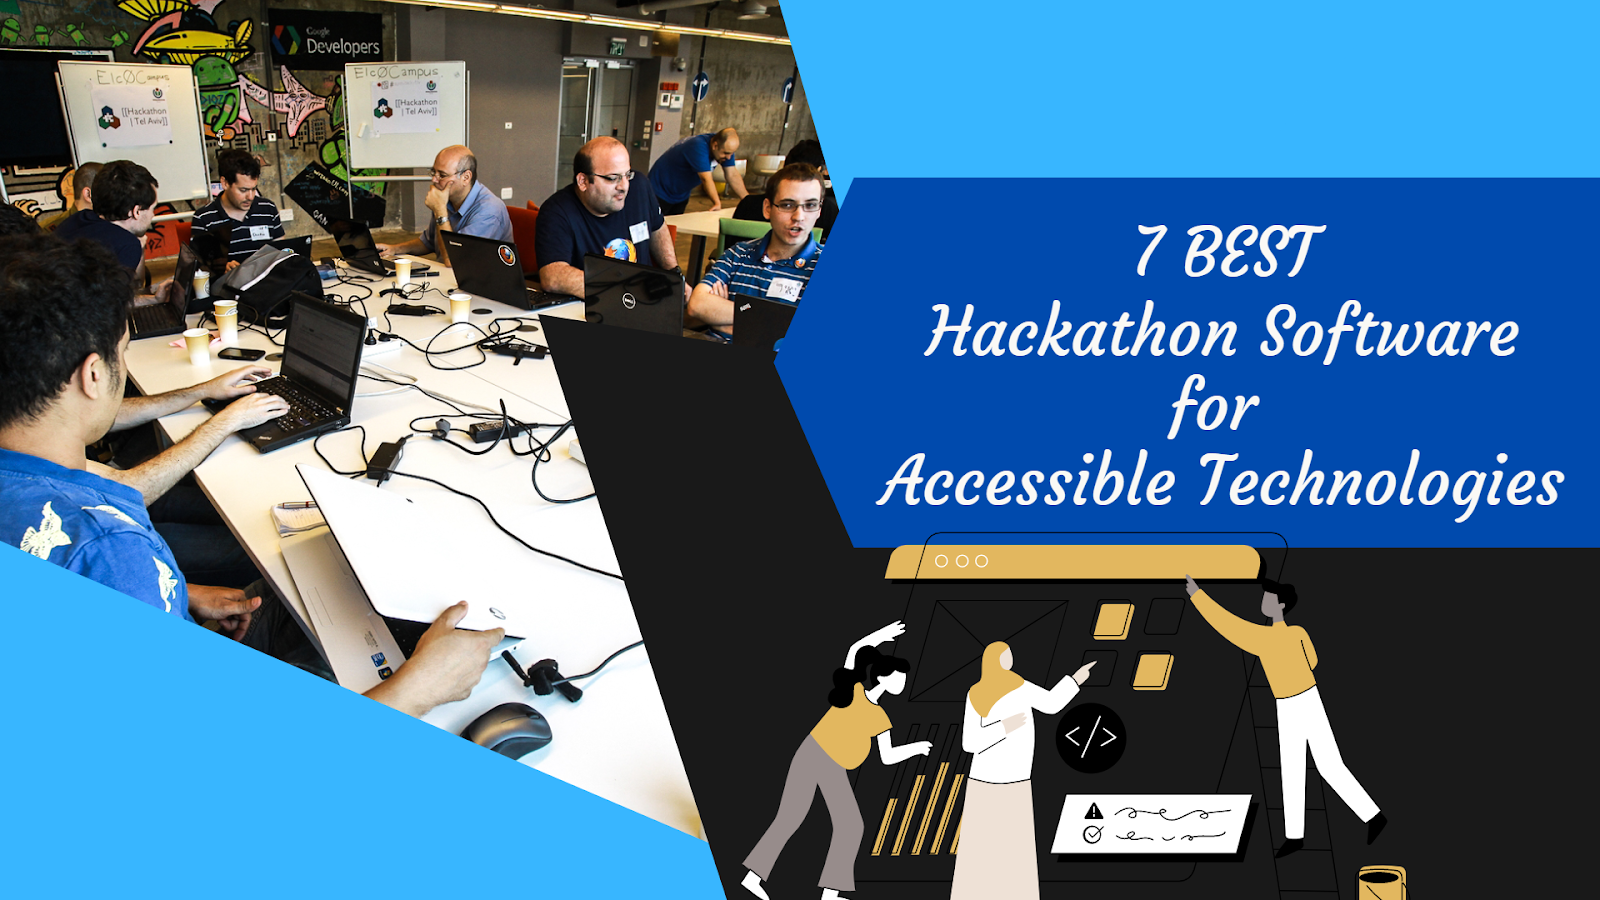 7 Best Hackathon Software for Accessible Technologies